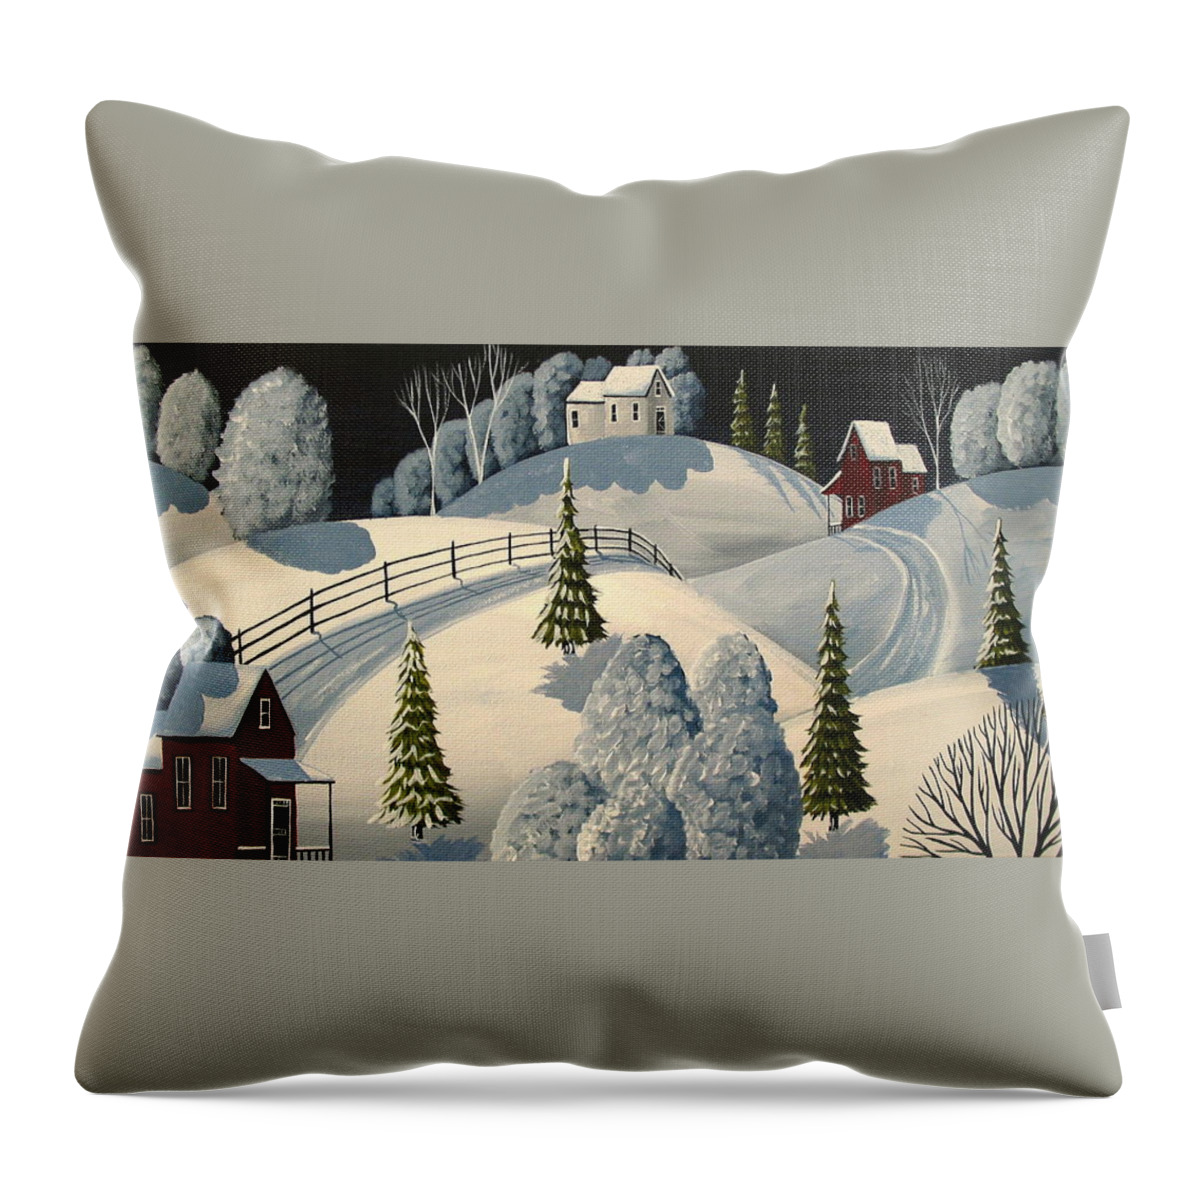 Art Throw Pillow featuring the painting Country Winter Night - folk art landscape by Debbie Criswell